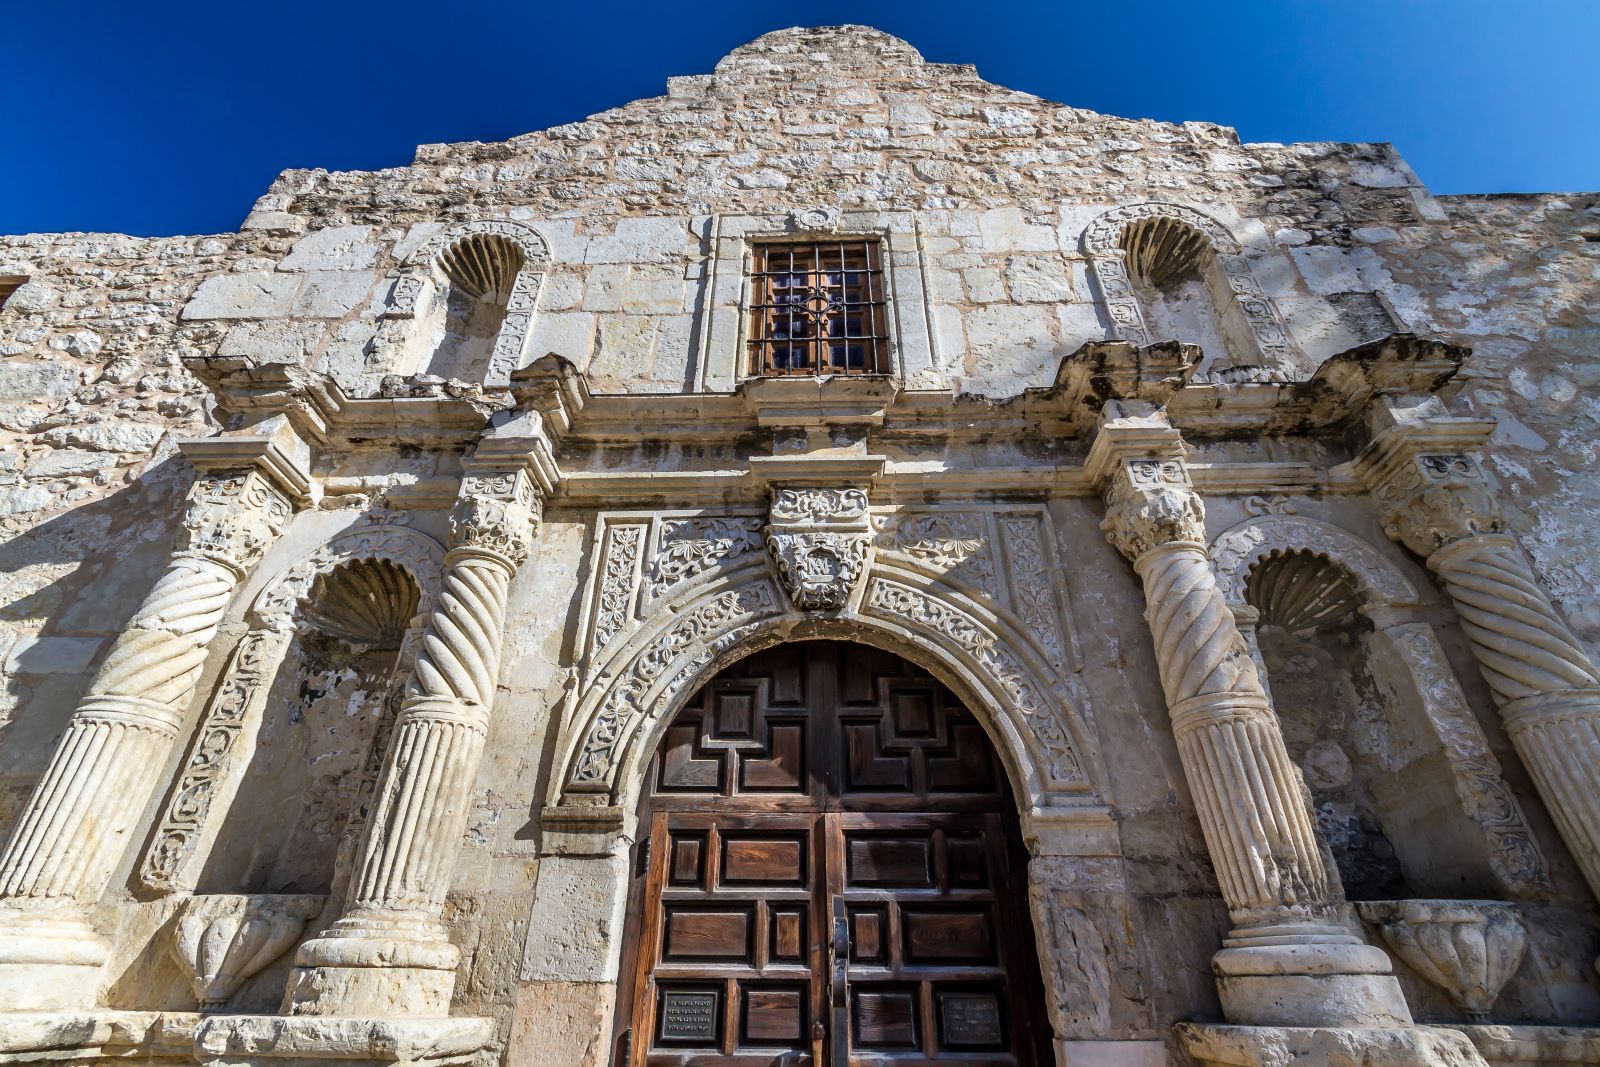 Image credit: Shutterstock / Richard A McMillin <p>A gem suggested by an online pal, the San Antonio Missions National Historical Park offers a peek into early Spanish history with plenty of educational trails and activities for kids. Tip: Entry is free, and the park often hosts special events, so check the calendar before you go!</p>